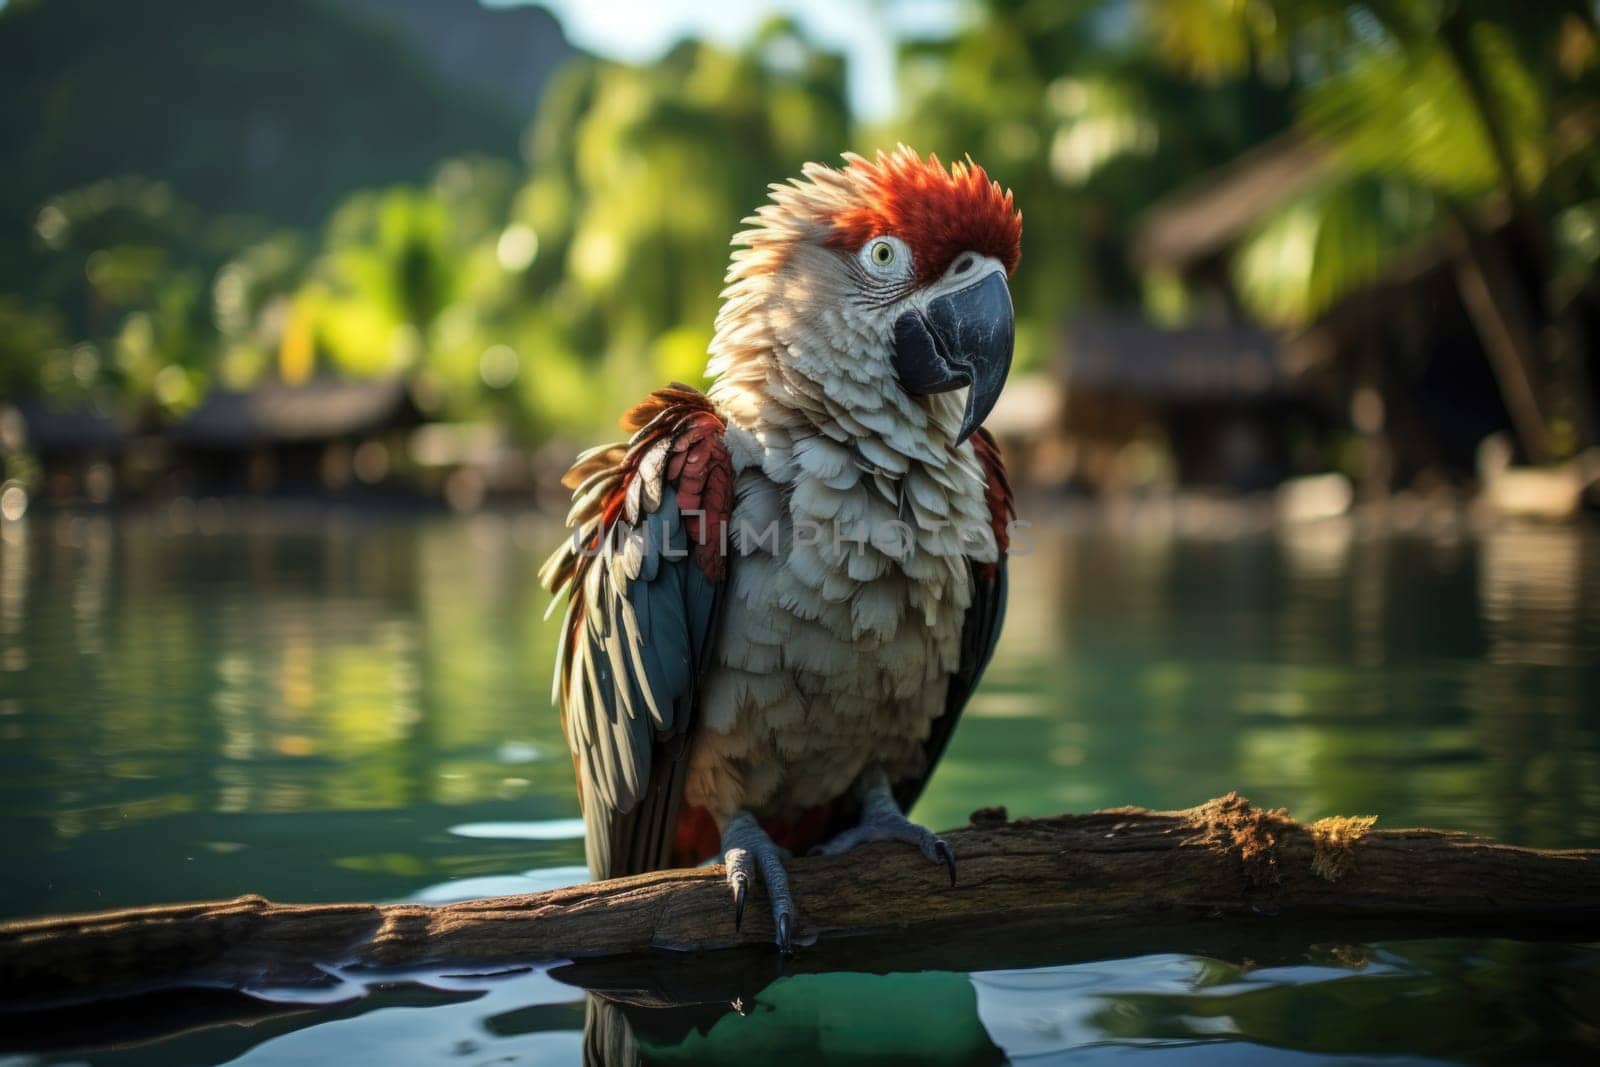 A parrot on the water near the island of Tahiti. Bird by Lobachad